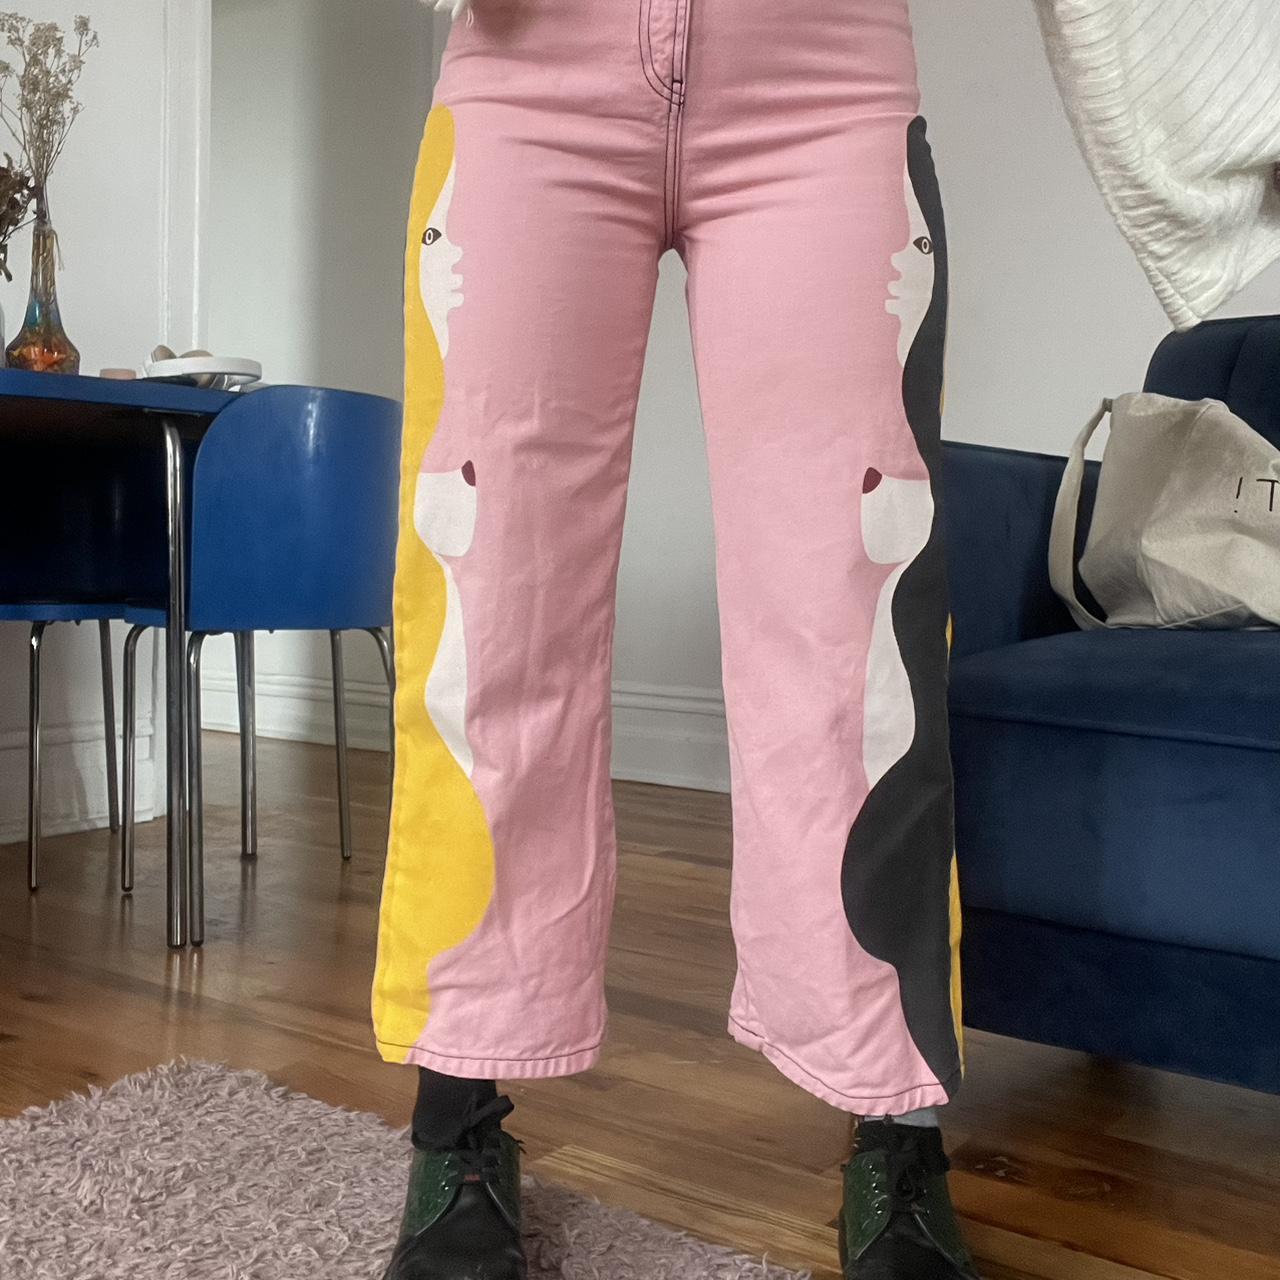 Desigual Women's Yellow and Pink Trousers (2)